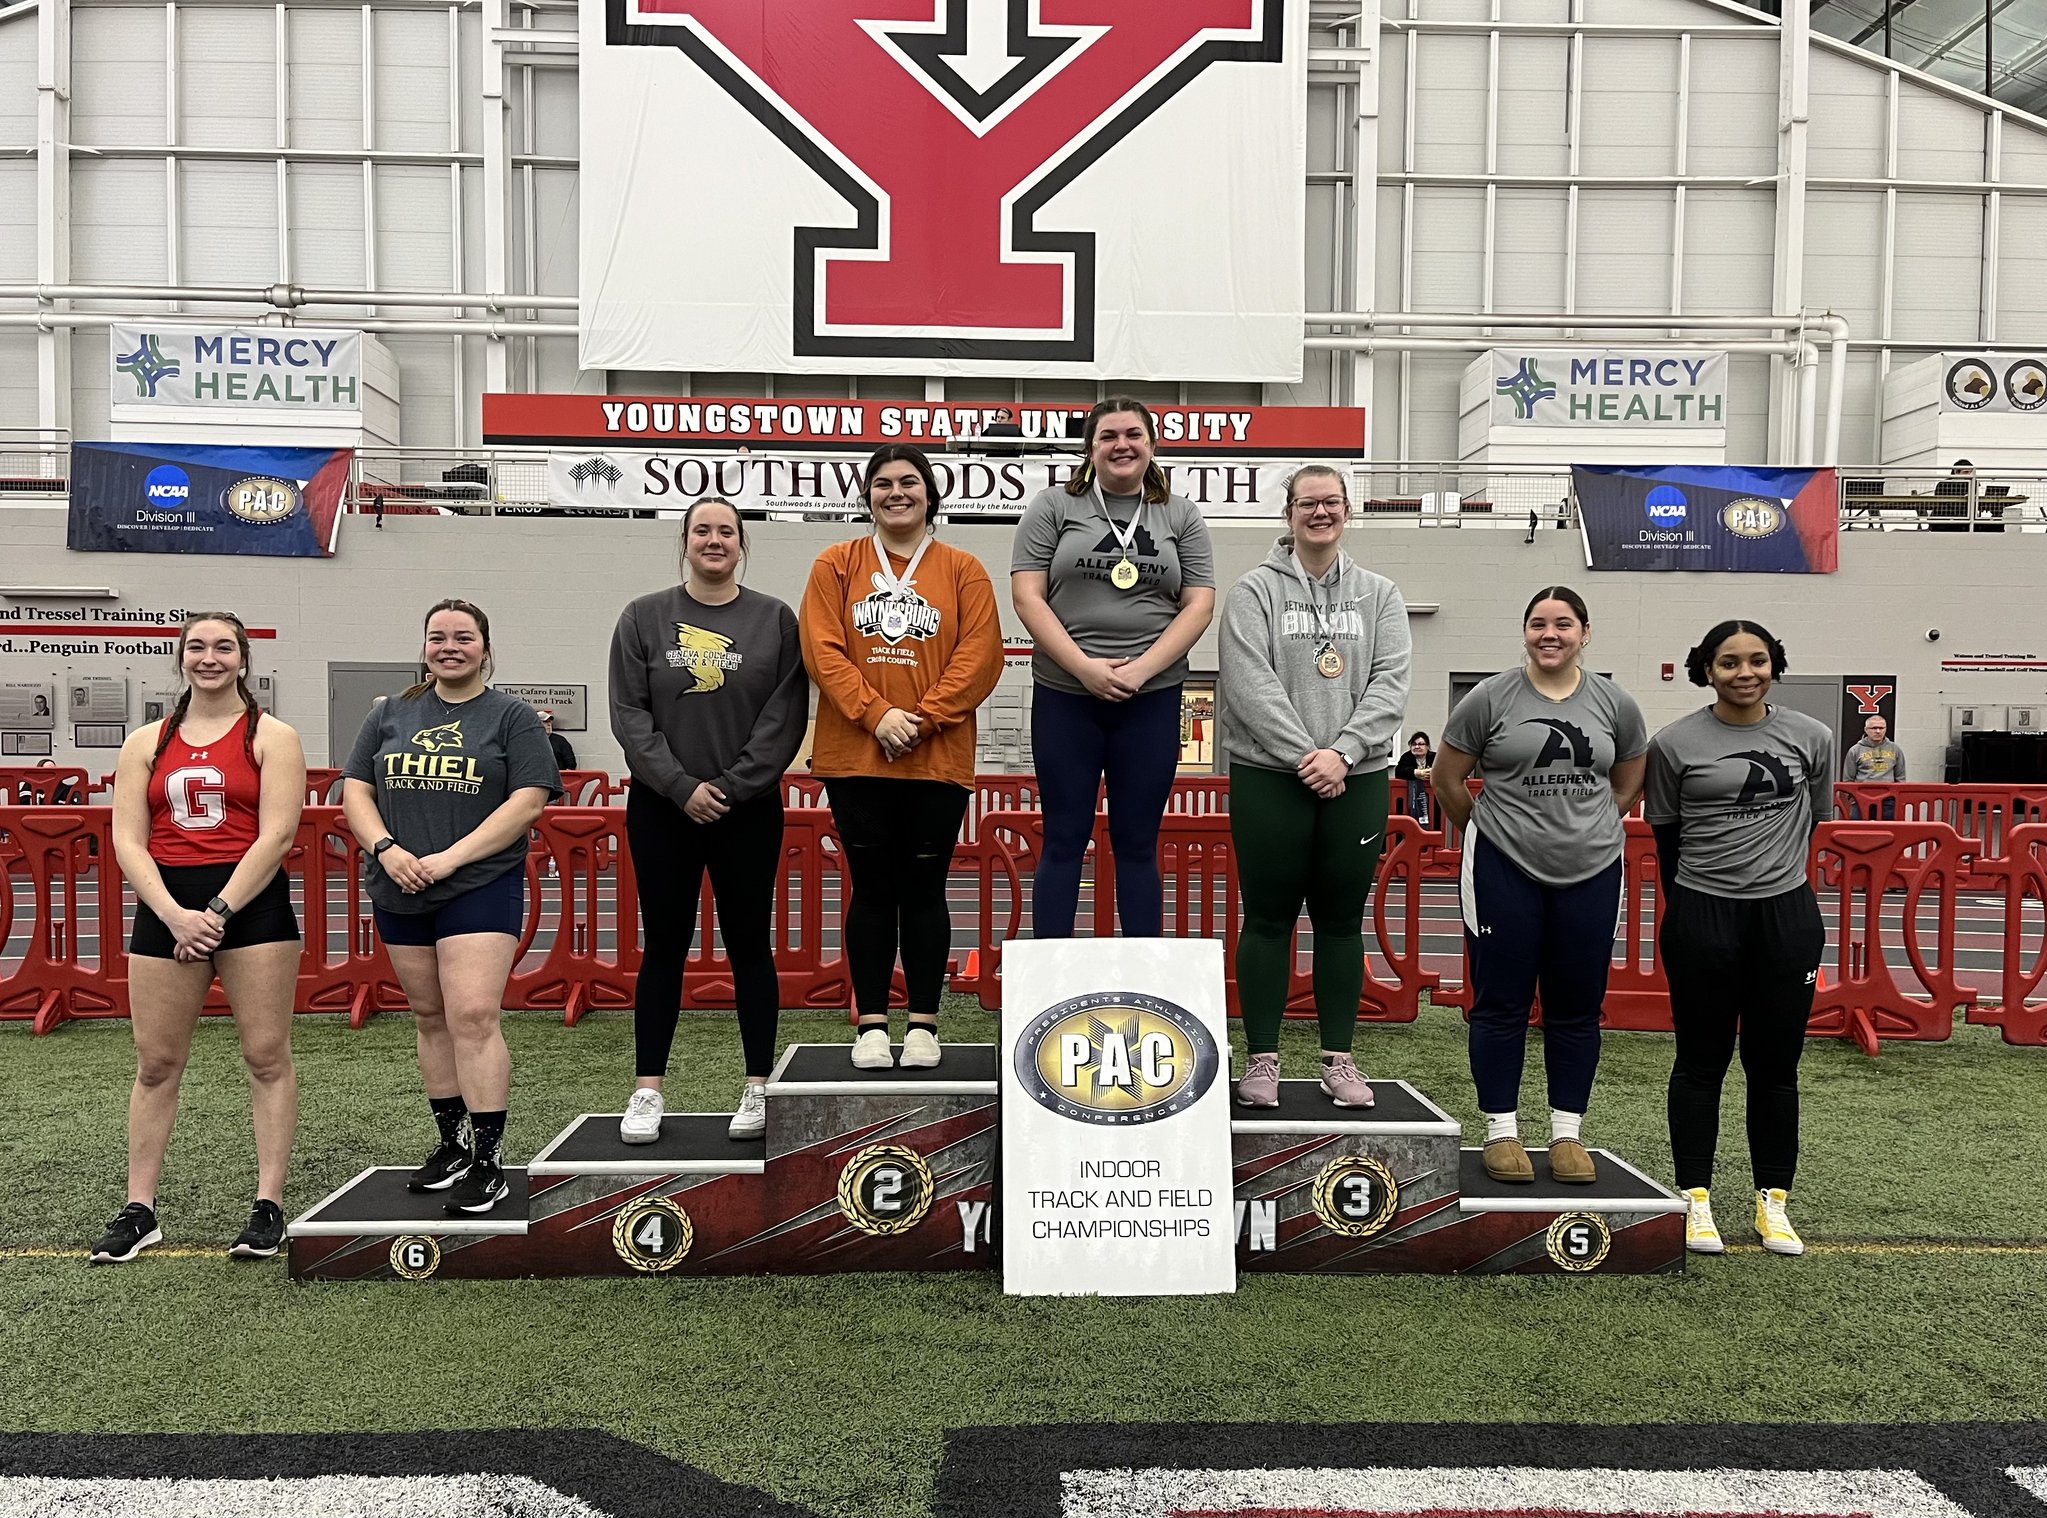 Women's Track and Field: Mahaffey and Williams set school records at PAC Championships